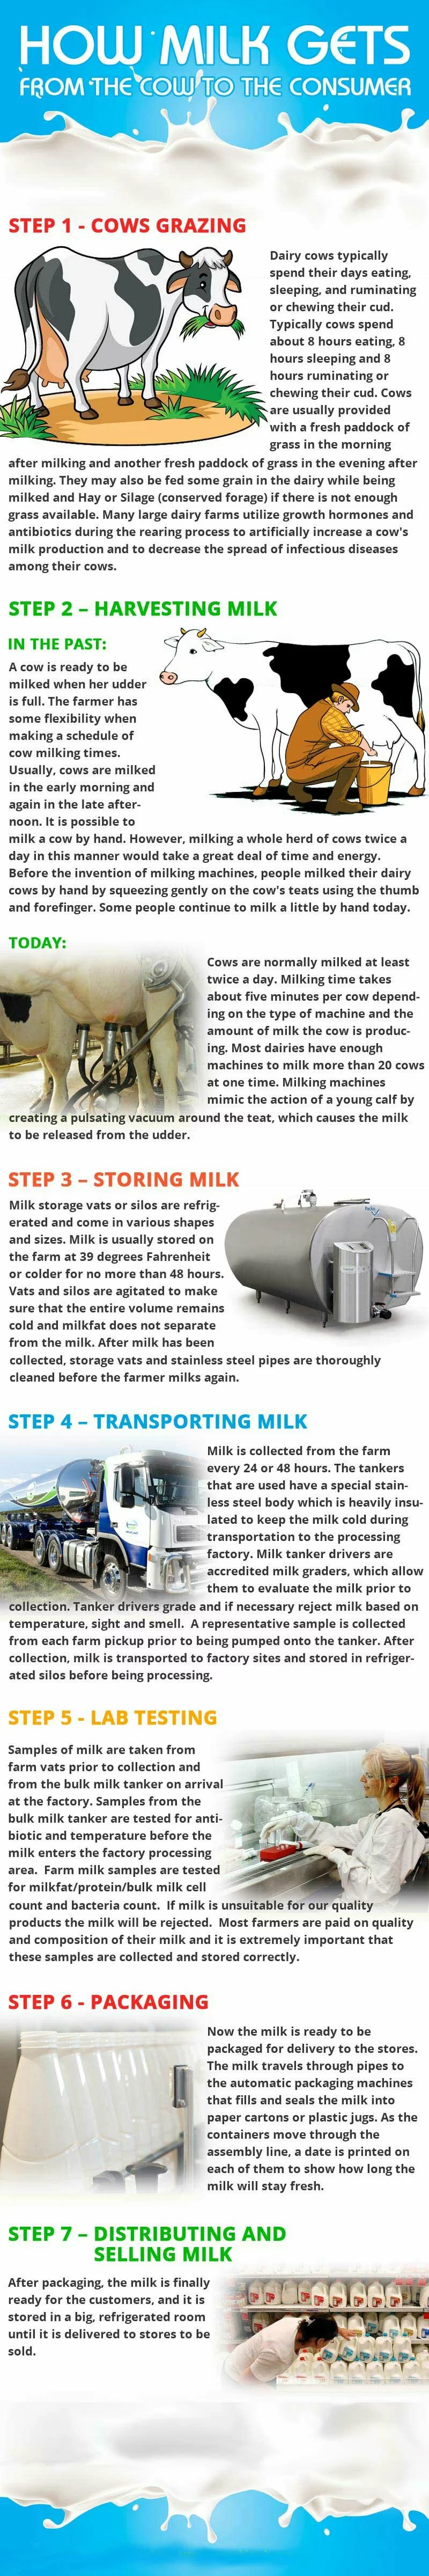 How milk gets from the cow to the consumer